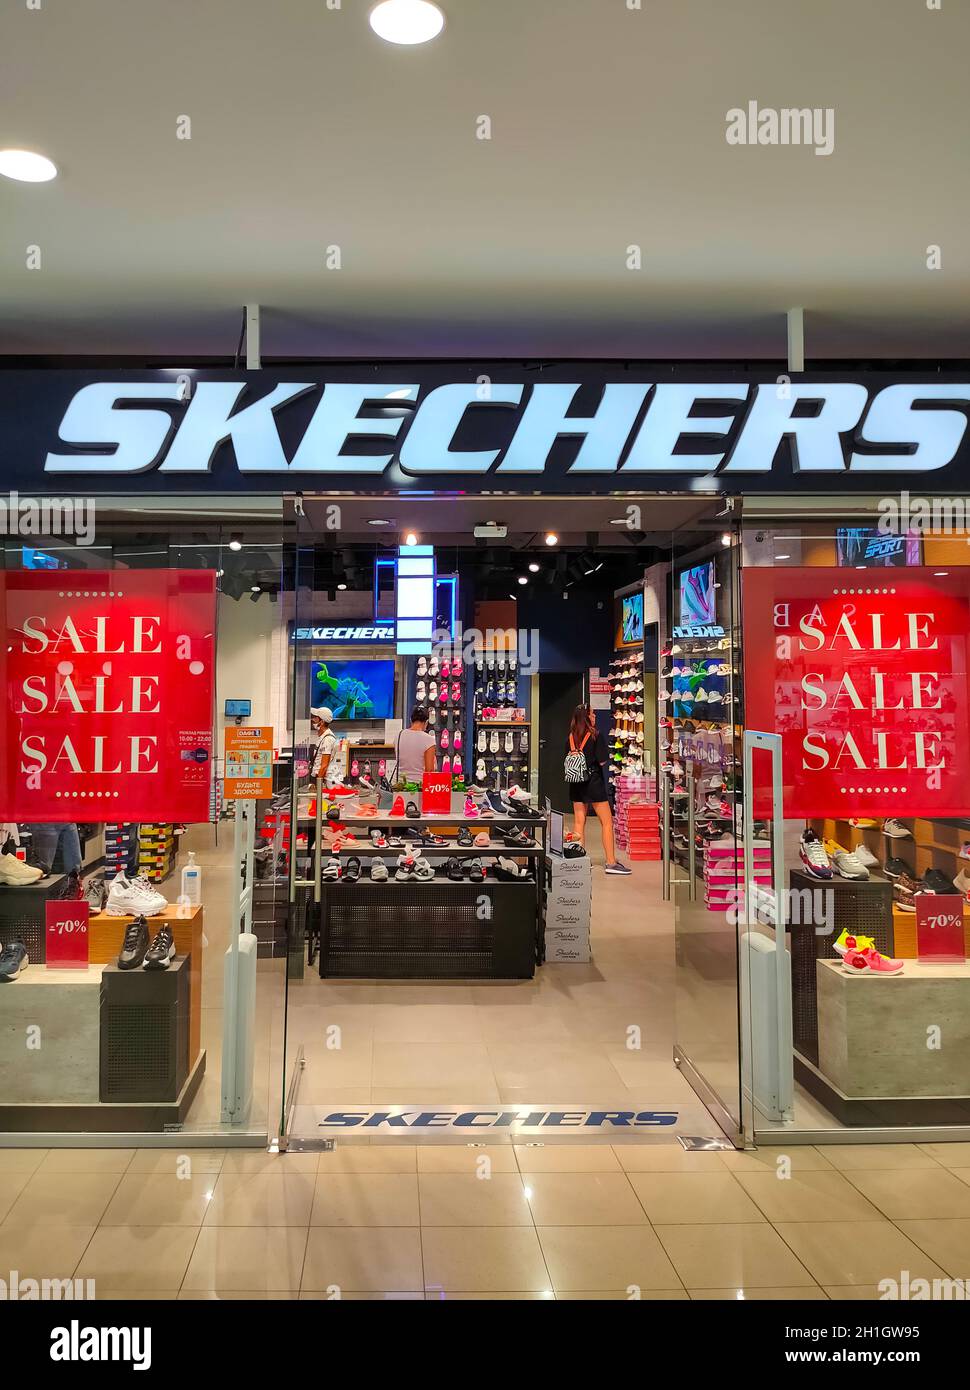 Kiyv, Ukraine - August 9, 2020: Sign of Skechers on the shop at Shopping  Mall. Skechers is an American shoes company founded by CEO Robert Greenberg  a Stock Photo - Alamy